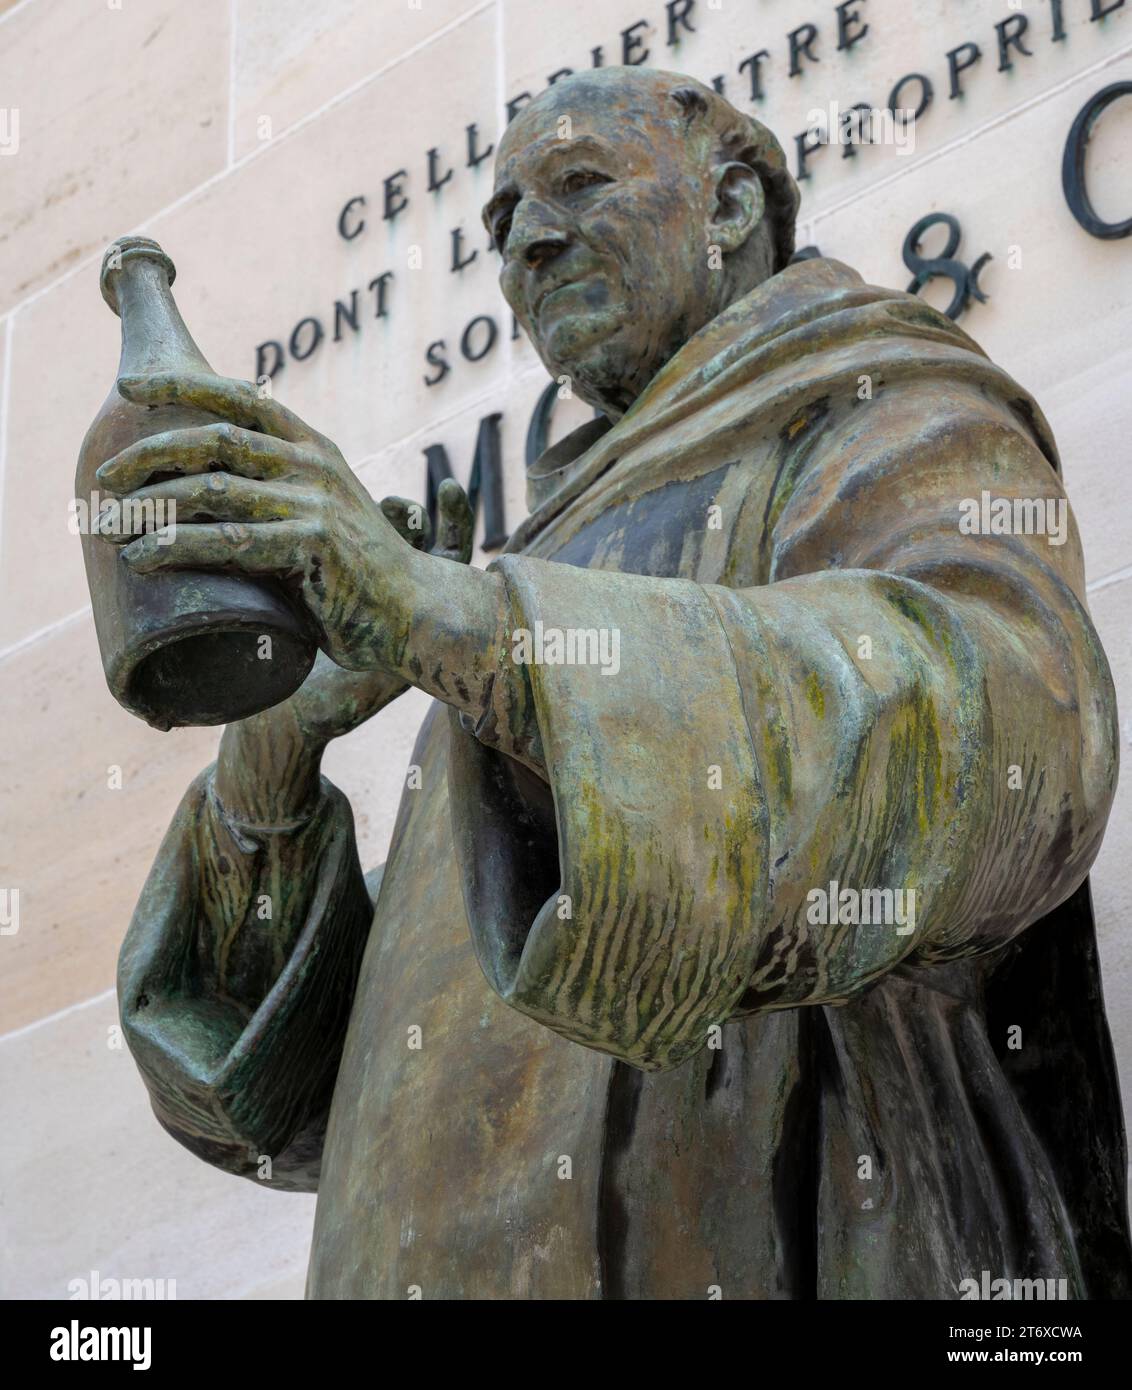 Statue of Don Pierre Perignon in front of Moet et Chandon Headquarters, Epernay, Champagne Region, France. Stock Photo